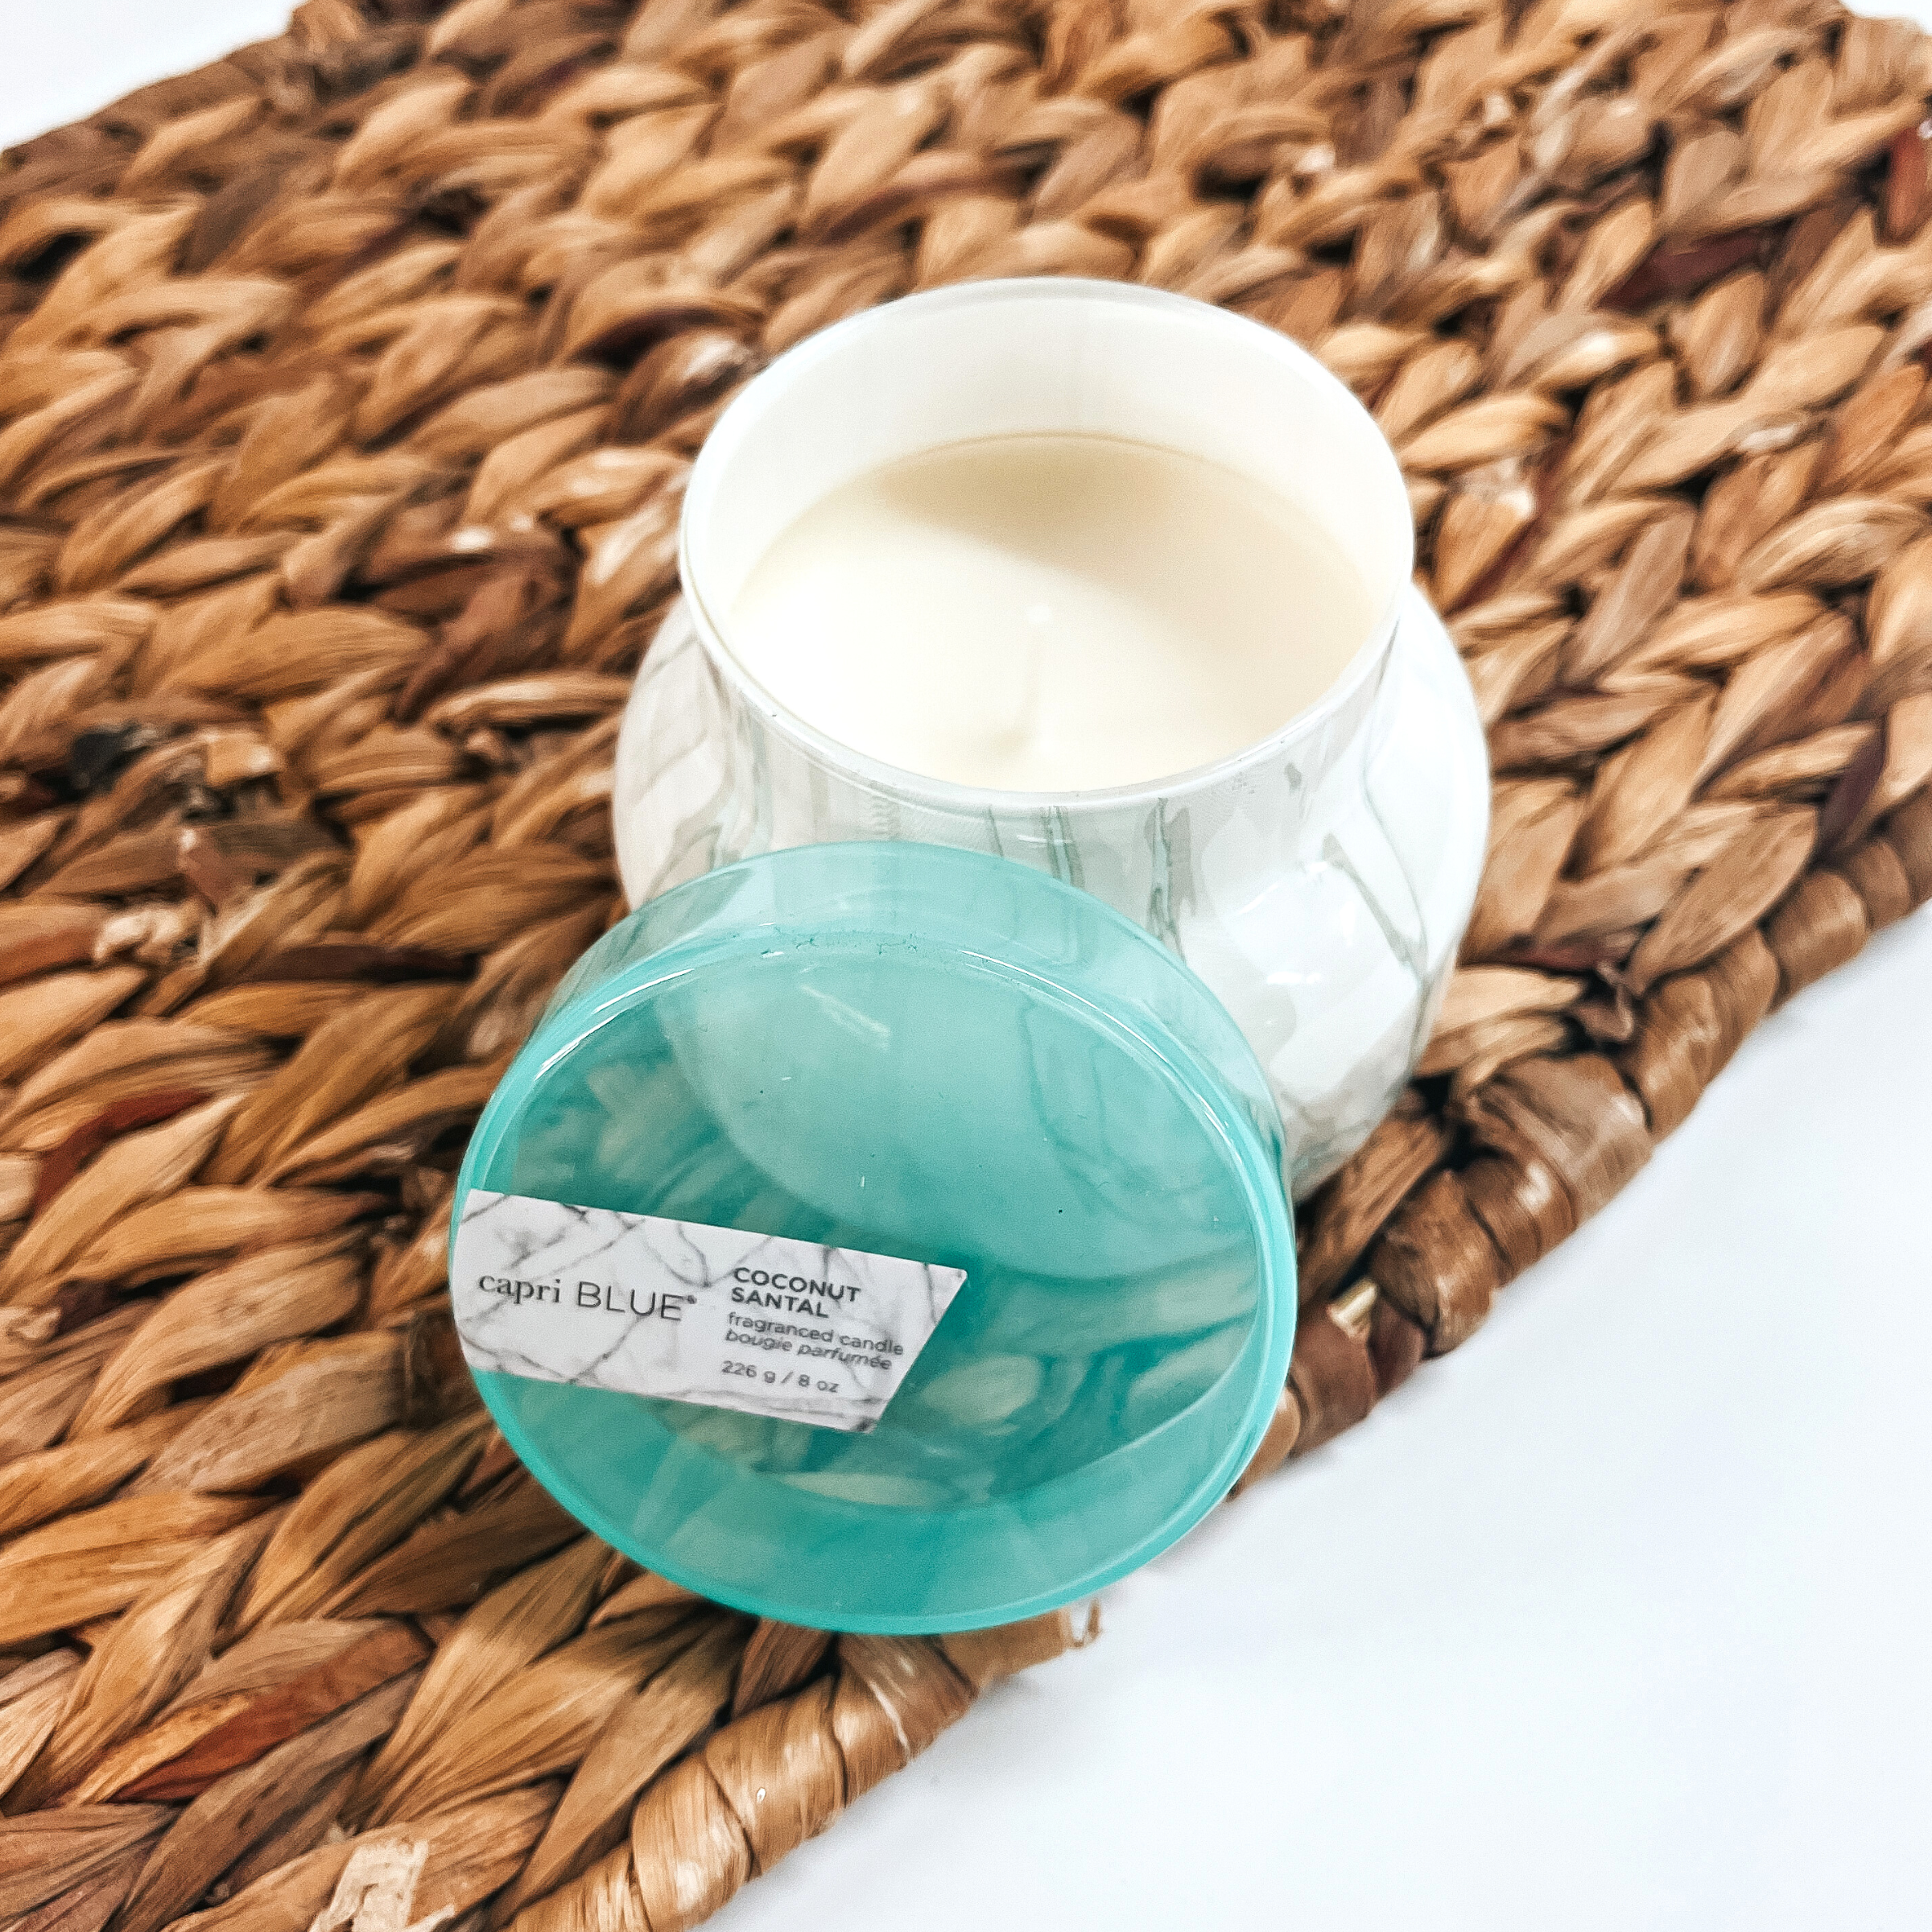 Pictured is a 8 oz. Marble Petite Jar Candle in Sea Glass from Capri Blue. The candle scent is Coconut Santal, which smells like hibiscus, lime coconut and hits of amber. This candle has a burn time of up to 40 hours. It is pictured open, with the top propped up, on a wicker tray.